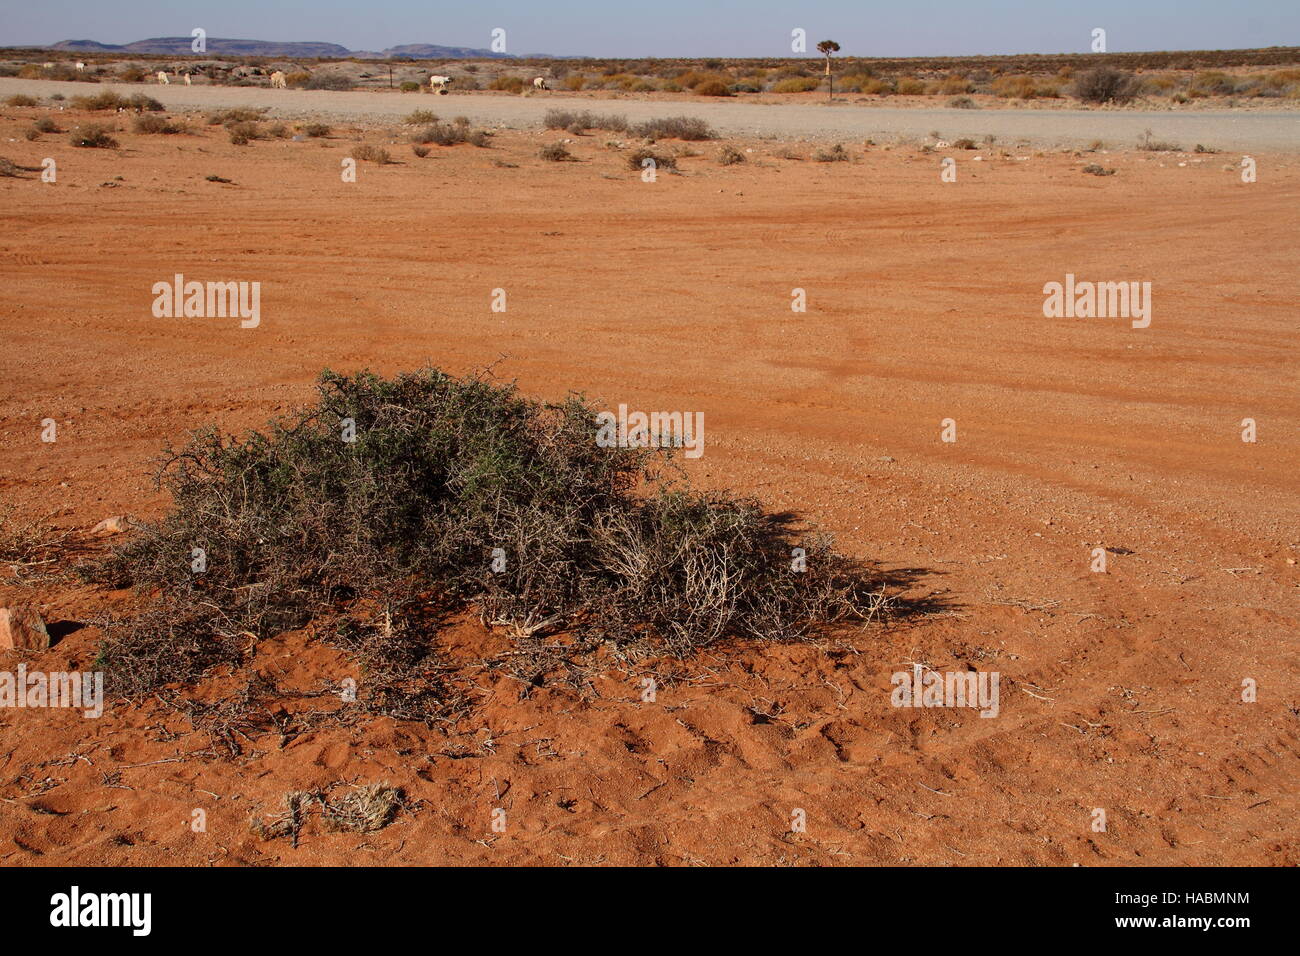 Sparse vegetation in the Namaqualand region in the Northern Cape Province of South Africa image in landscape format with copy space Stock Photo